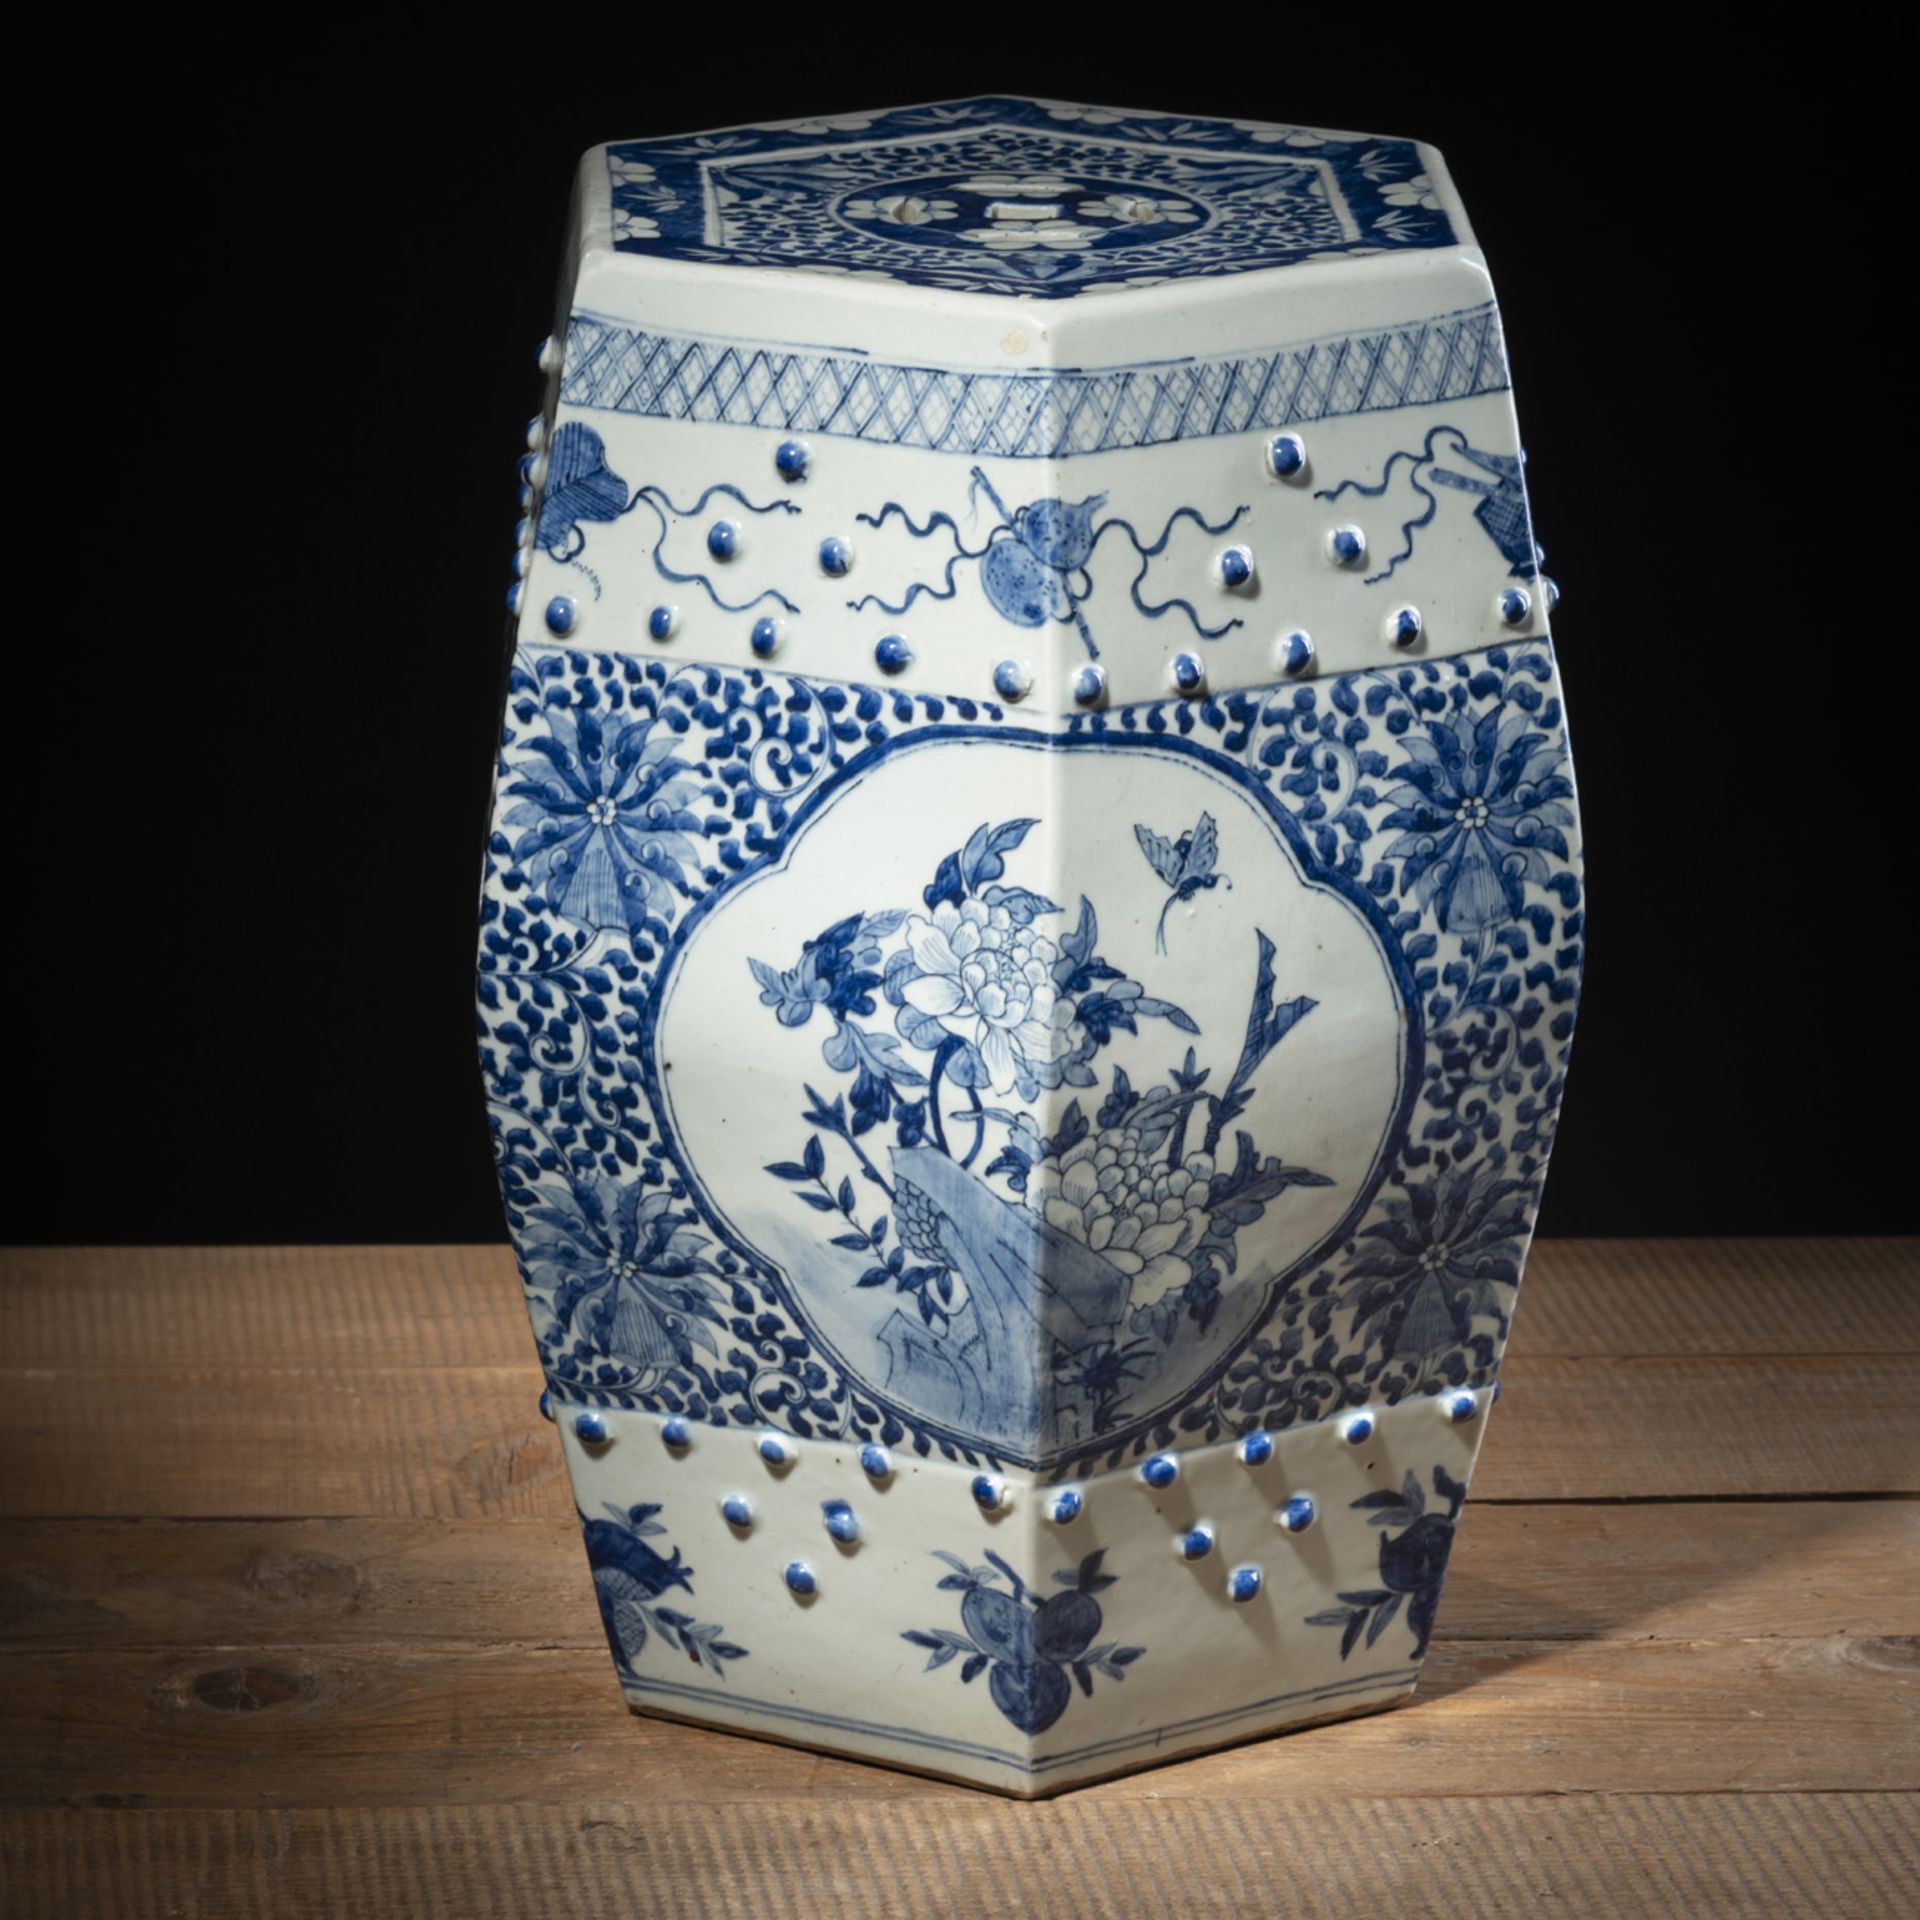 A HEXAGONAL BLUE AND WHITE PORCELAIN GARDEN STOOL WITH CASH COINS, FLOWERS AND LUCKY SYMBOLS DECORA